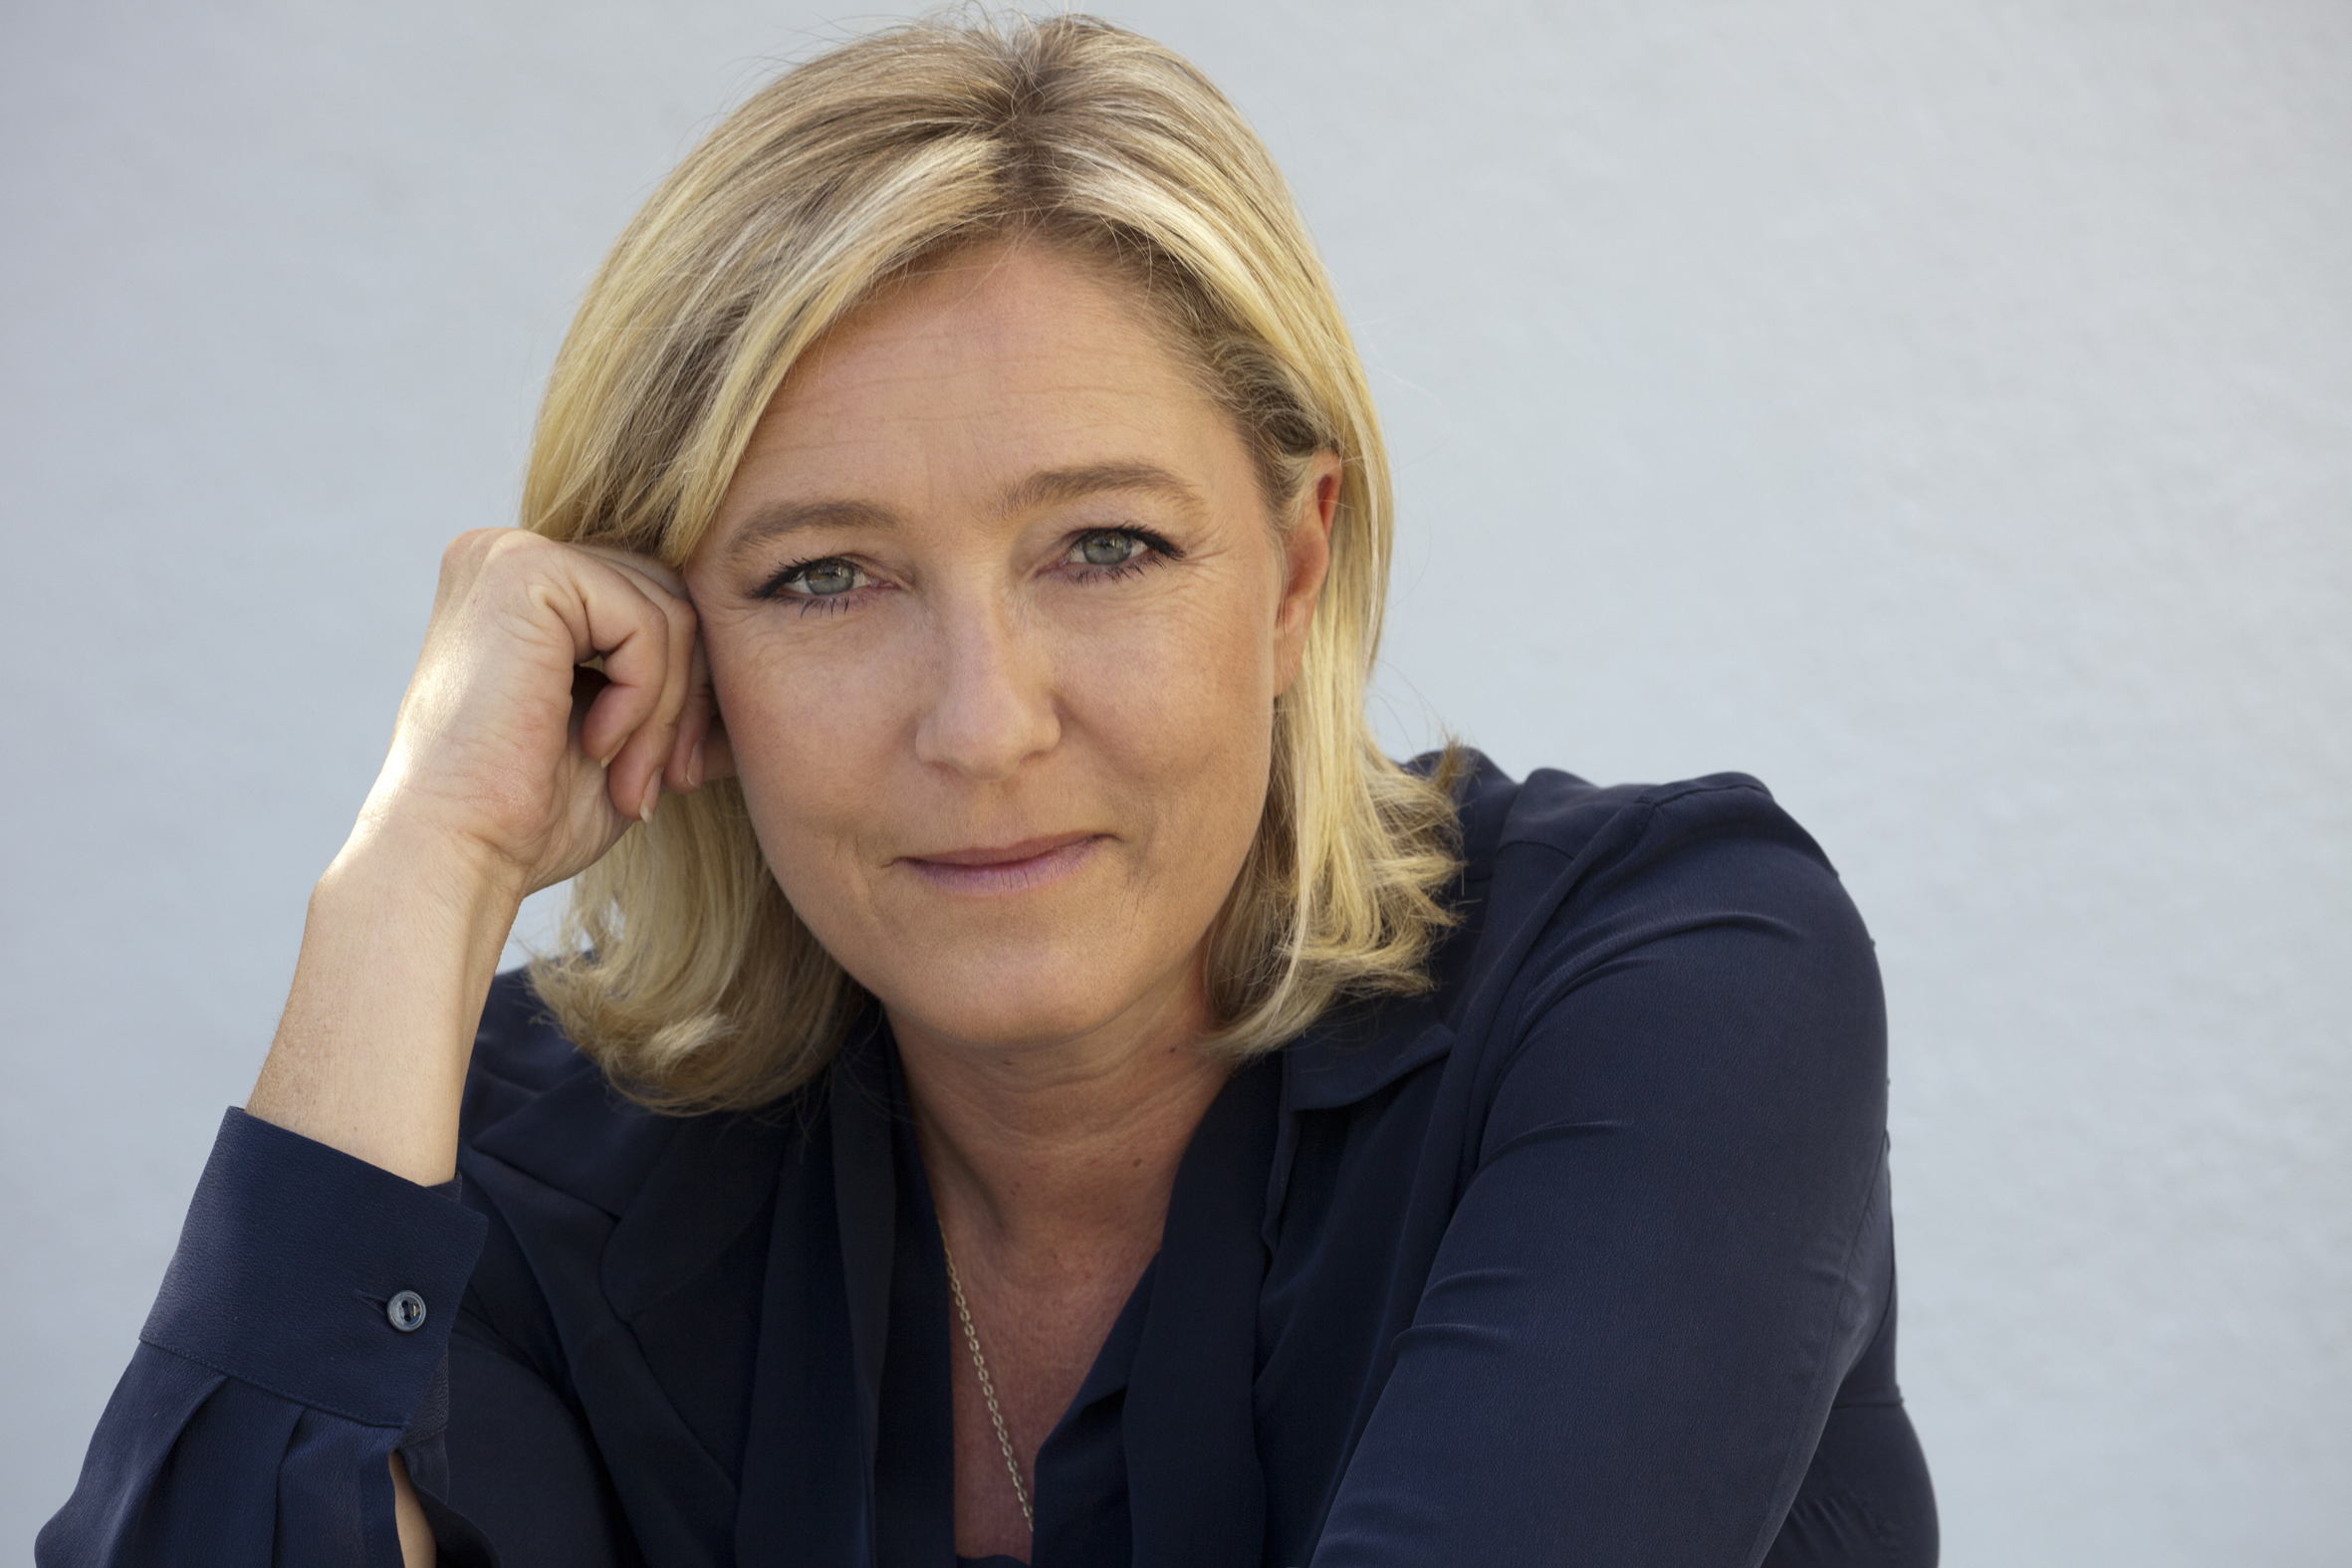 ‘Dismayed’ French Presidential Candidate Marine Le Pen Accused of Embezzling £500,000